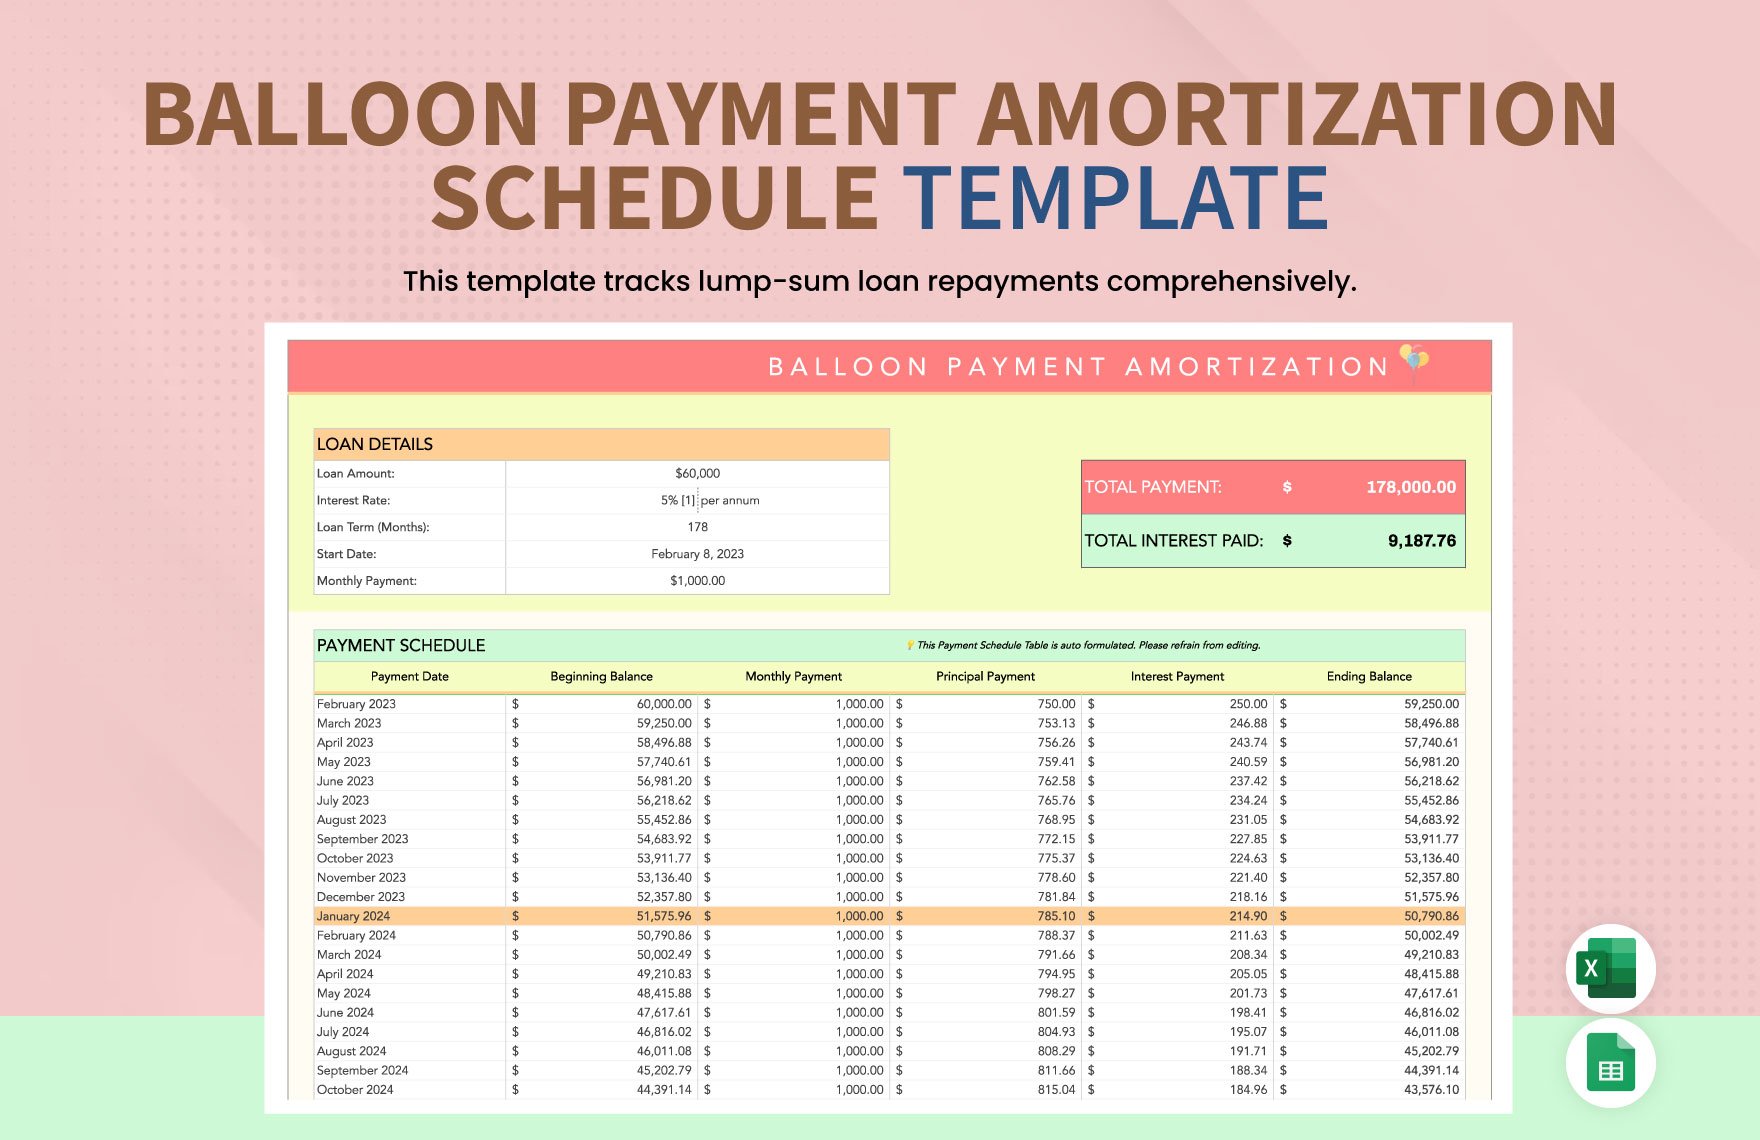 Balloon Payment Amortization Schedule Template in Excel, Google Sheets